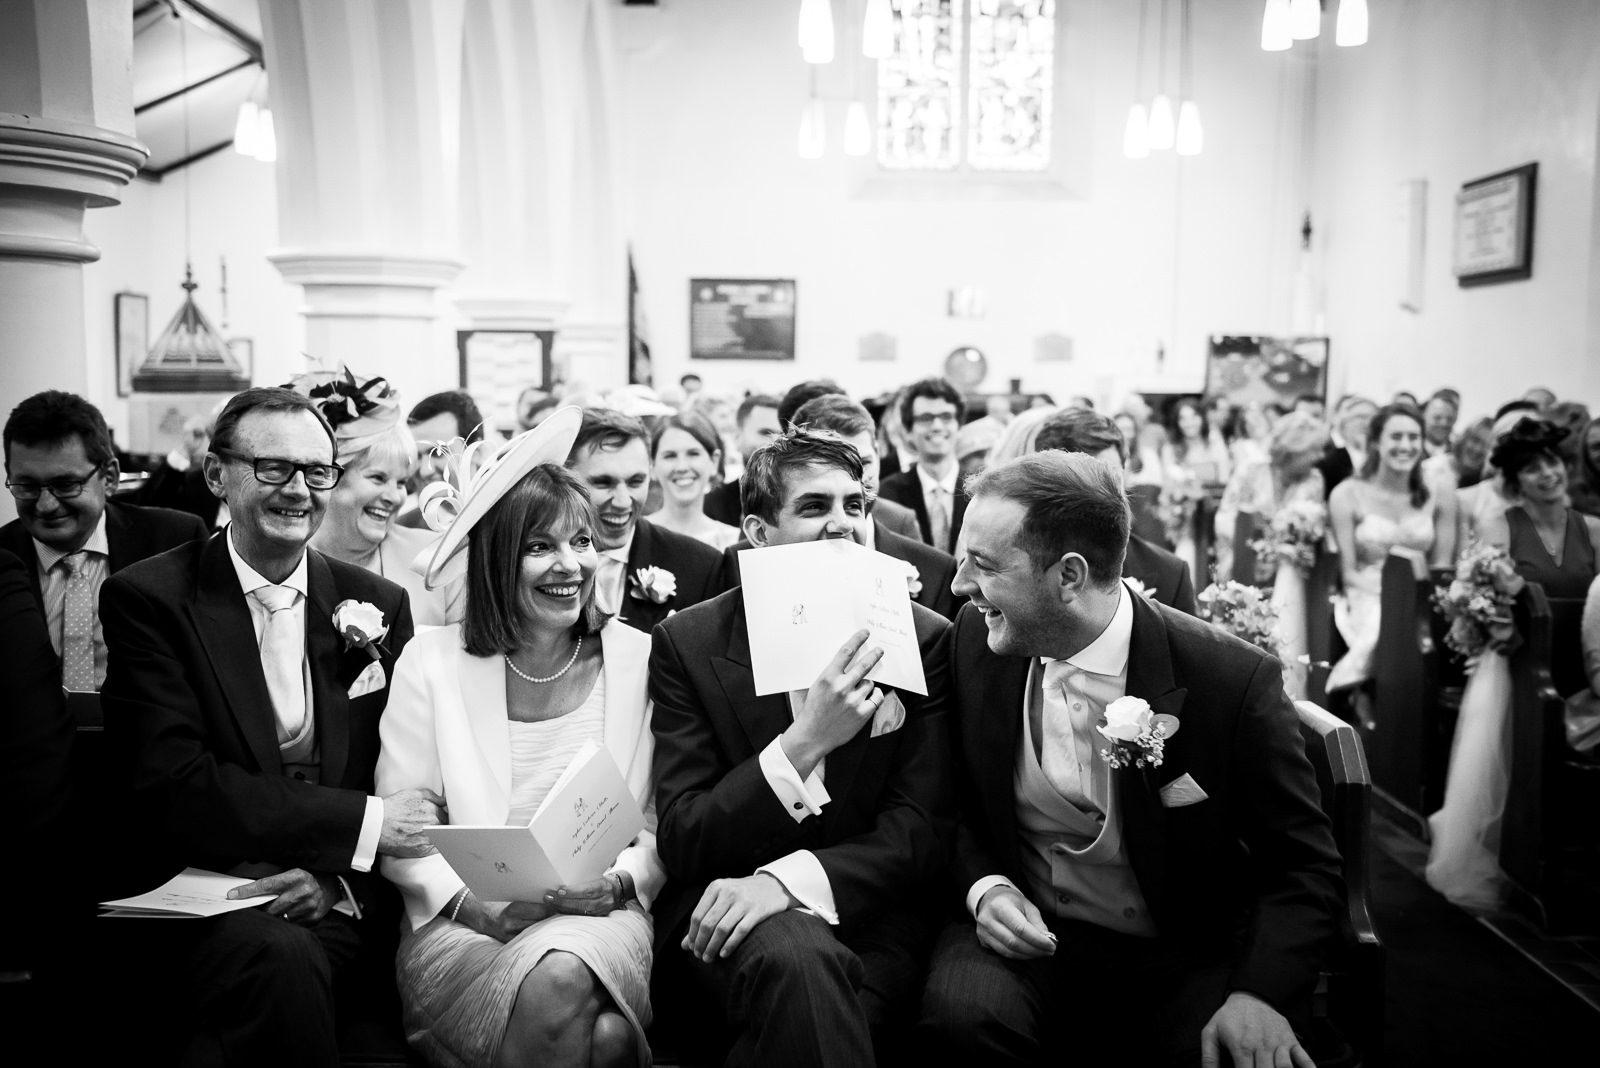 Classic black and white documentary wedding shot taken during the wedding ceremony.